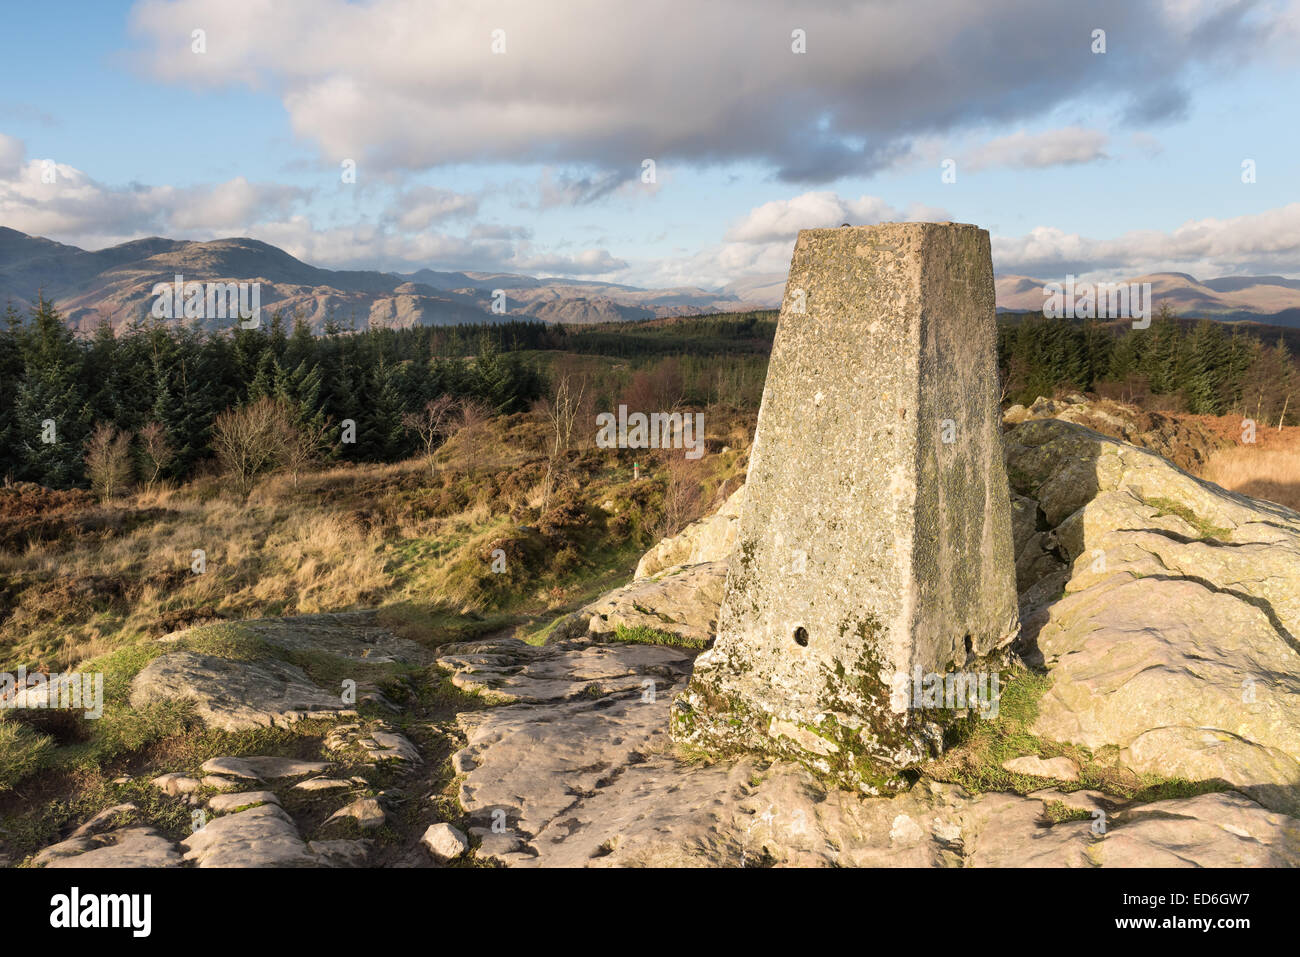 Summit trig point on Carron Crag, Grizedale Forest, English Lake District national park. Stock Photo